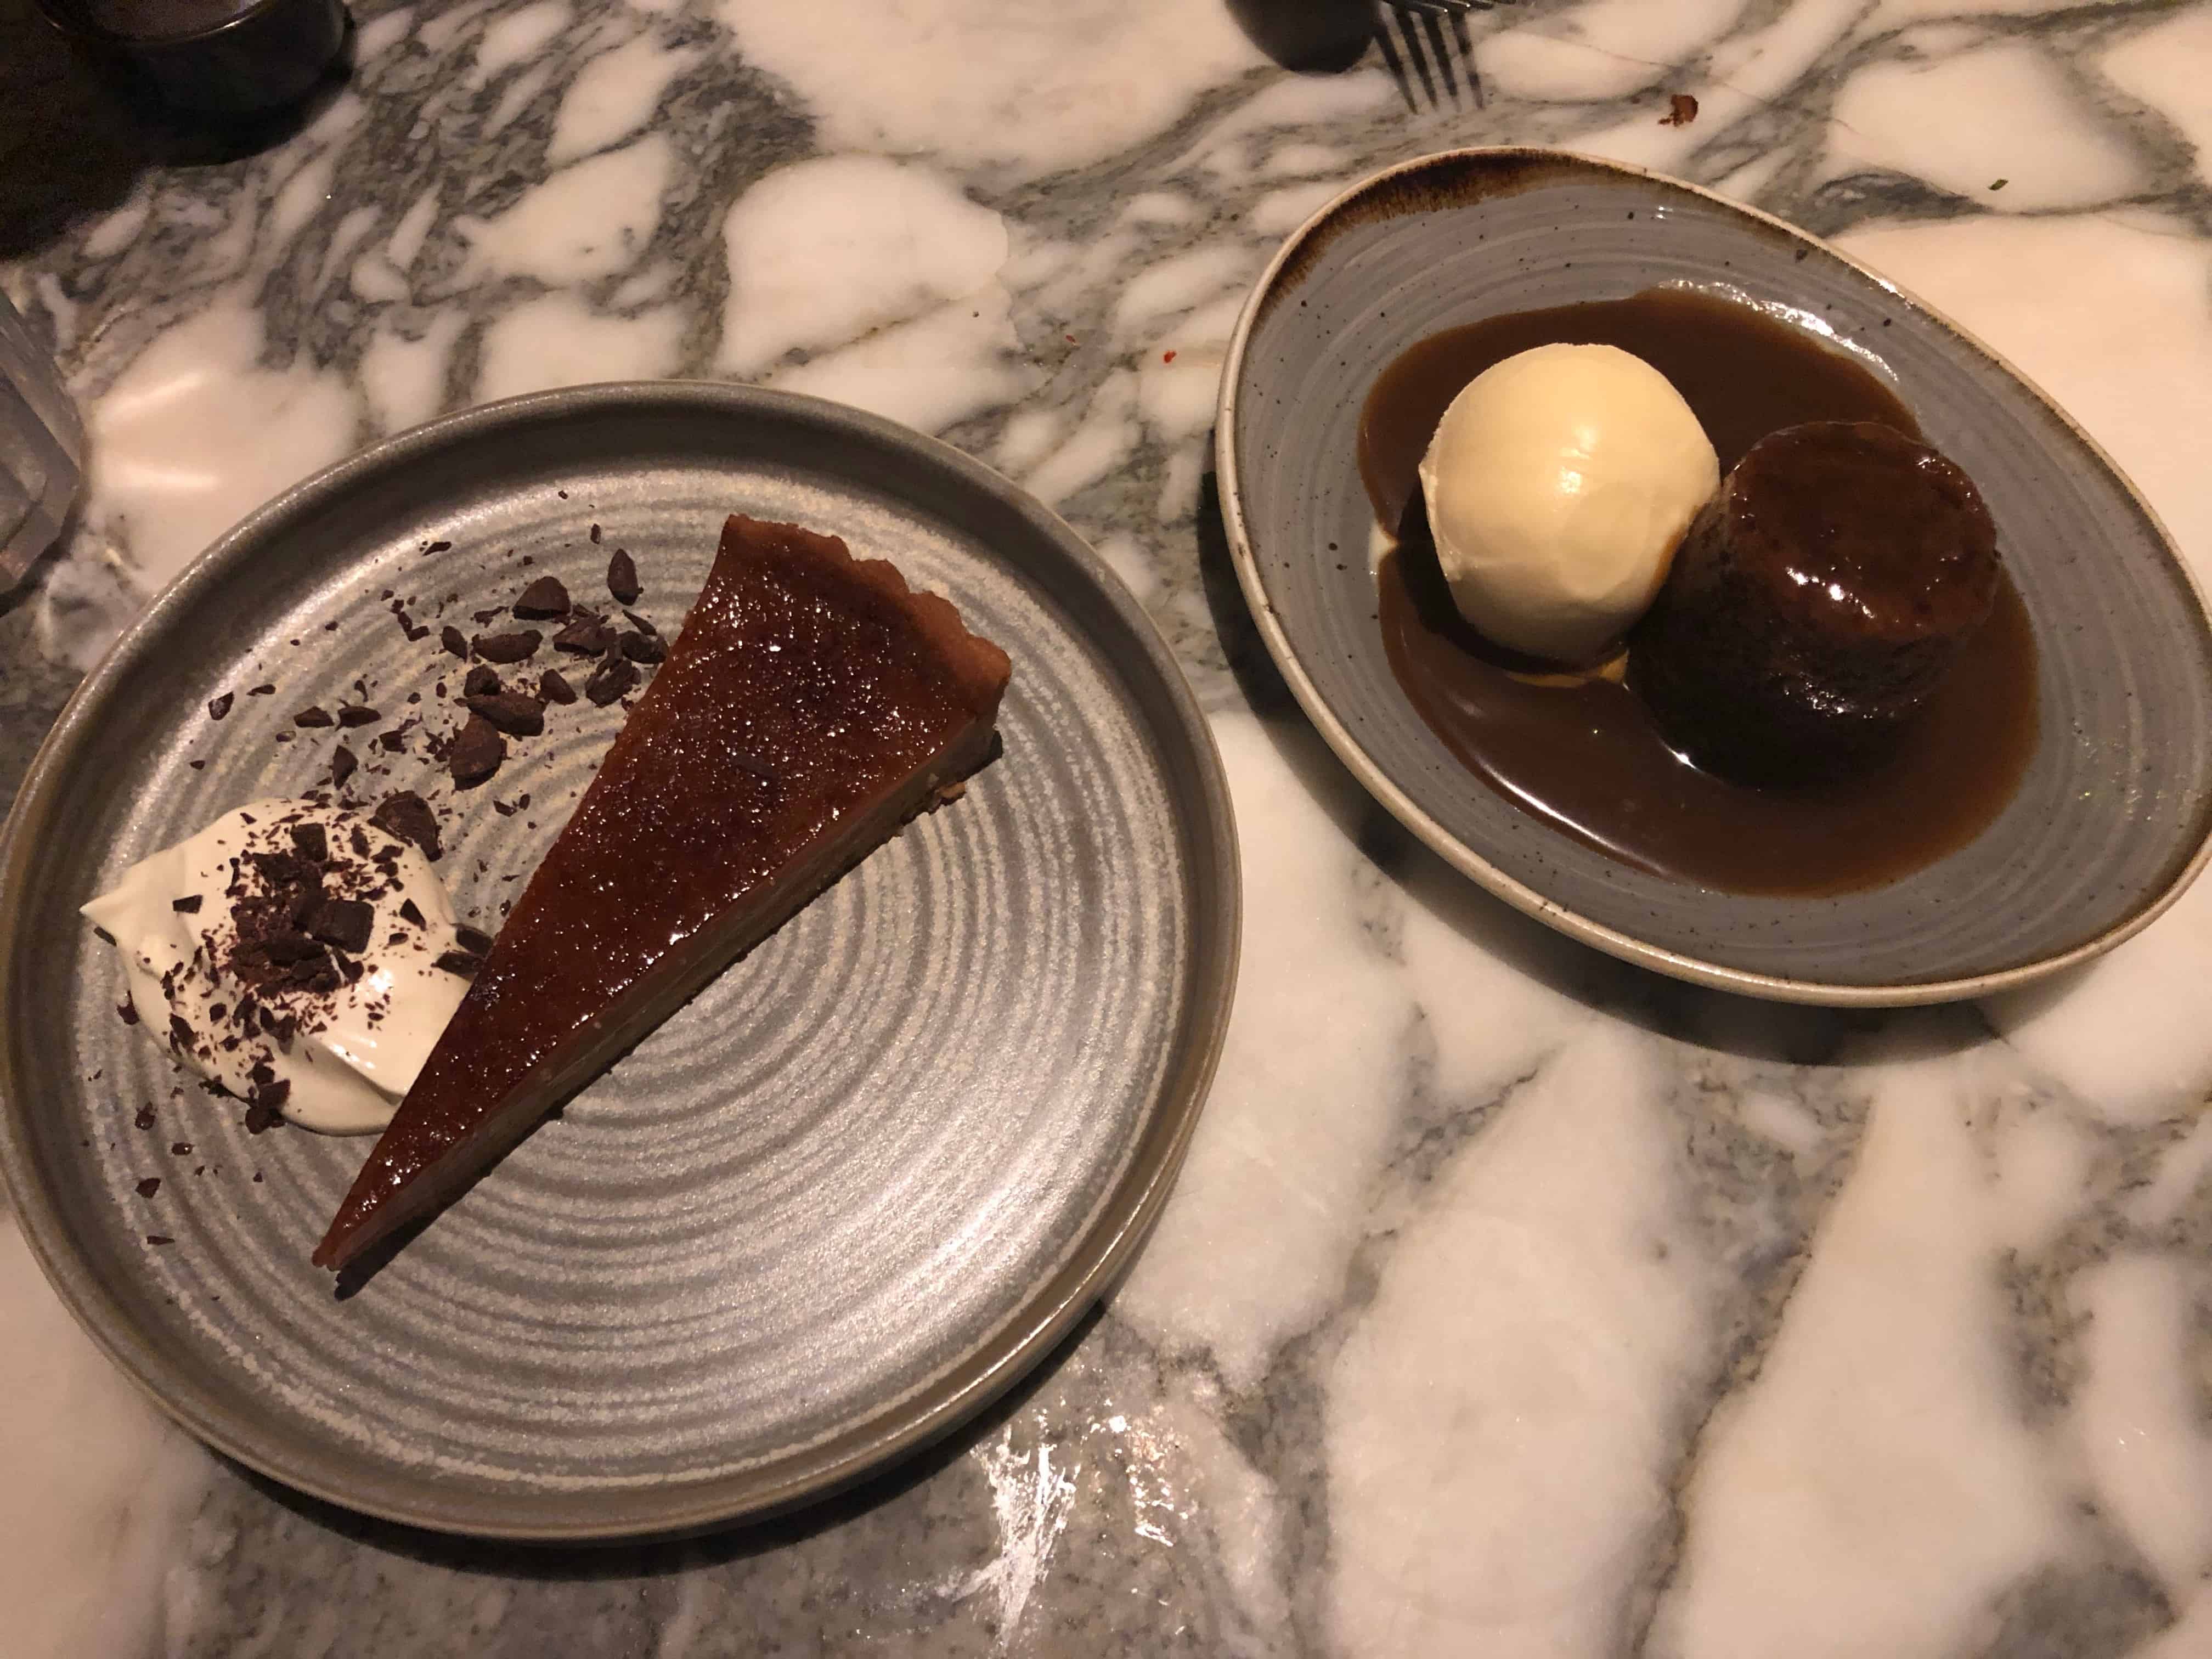 Desserts at Sophie's Soho in London, England